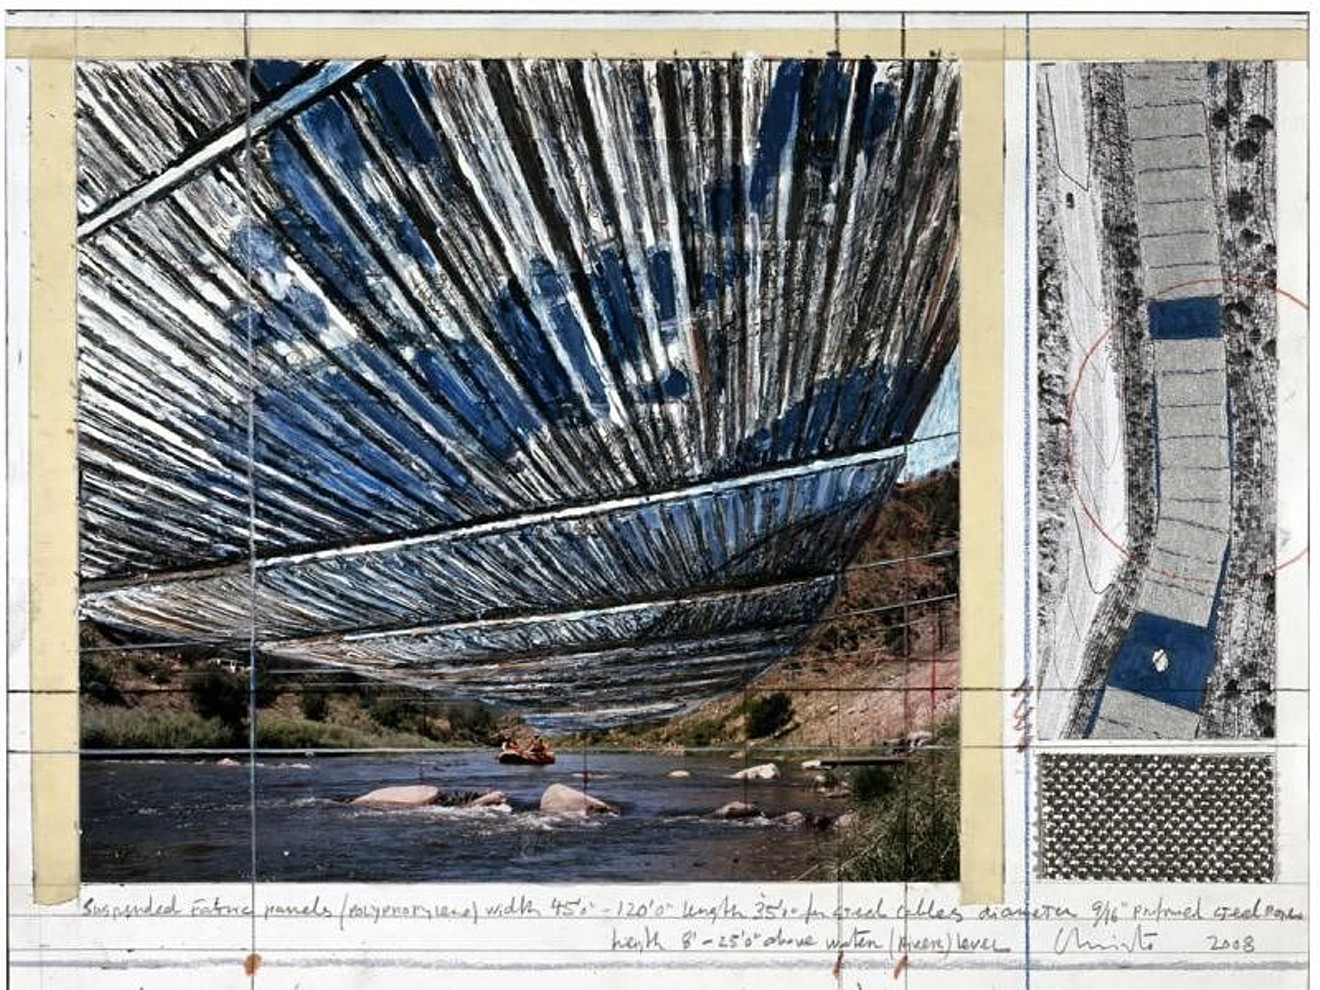 A view of Christo's vision for "Over the River."